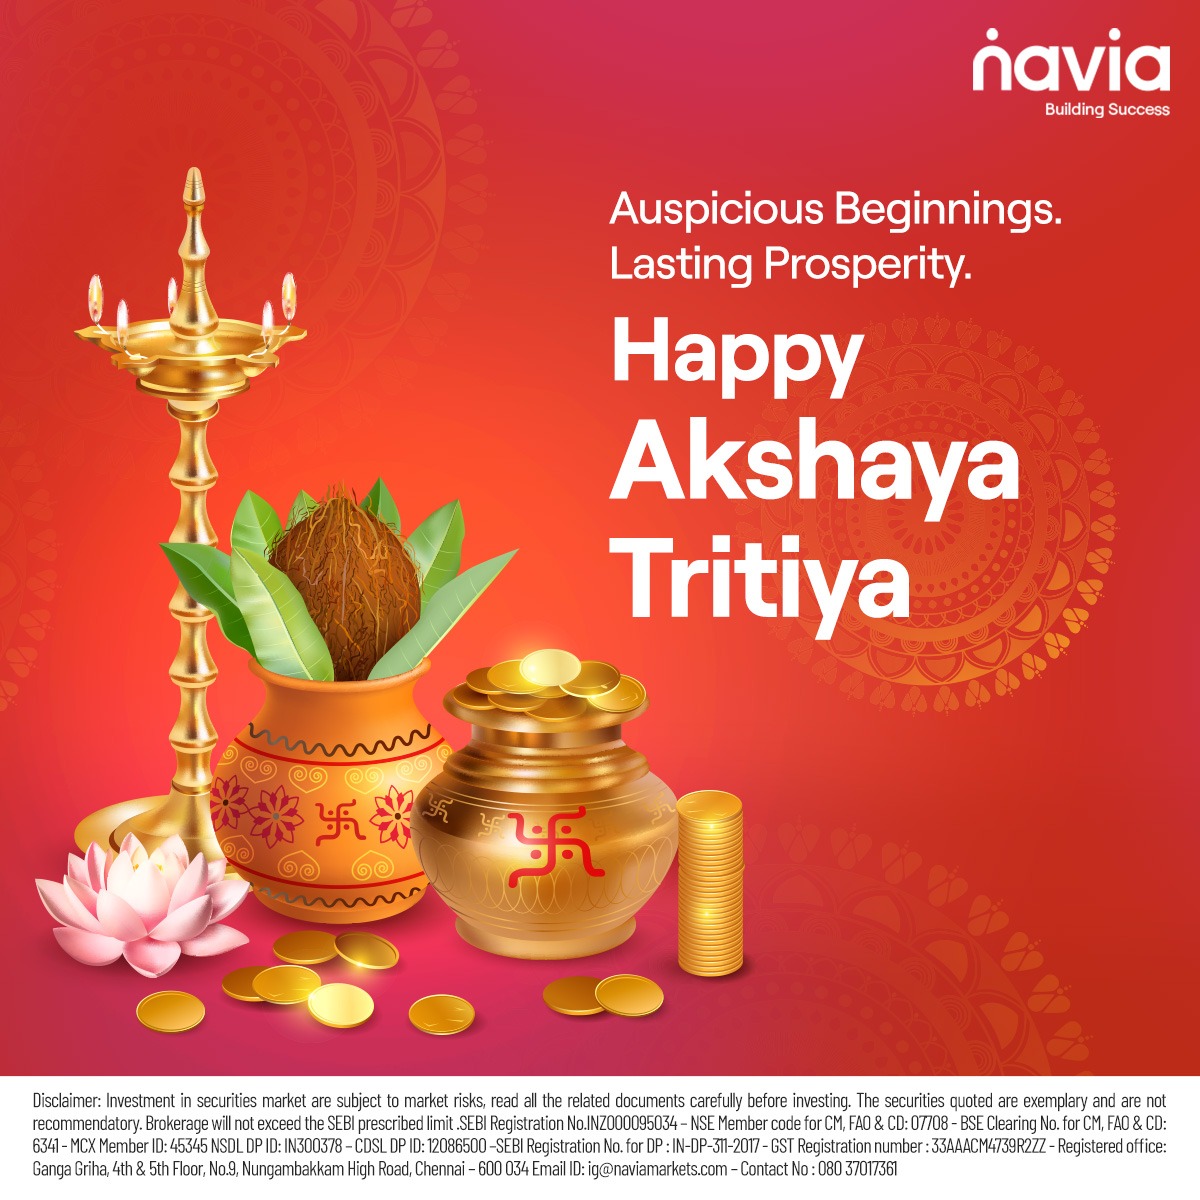 Start your investment journey on the auspicious day of Akshaya Tritiya! Together, let's unlock your financial potential and cultivate a future filled with abundance. Happy Akshaya Tritiya!

#Navia #TrustedTradingPartner #TradeSmart #FinancialFreedom #InvestingJourney #StockMarket